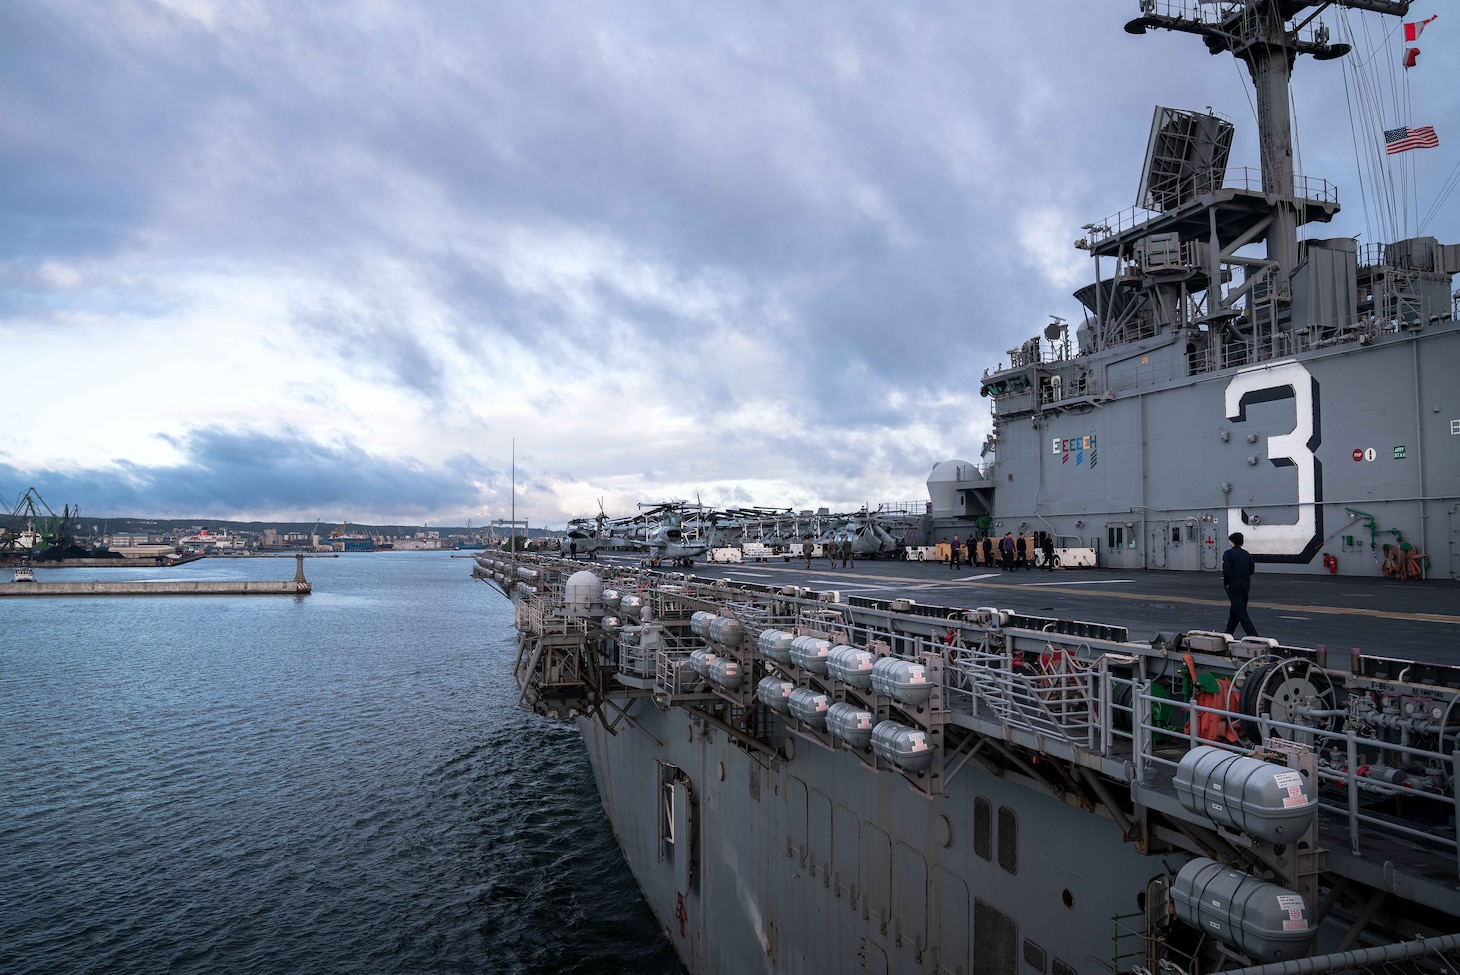 GDYNIA, Poland (Sep. 14, 2022) The Wasp-class amphibious assault ship USS Kearsarge (LHD 3) arrives in Gdynia, Poland Sep. 14, 2022, for a scheduled port visit. The Kearsarge Amphibious Ready Group and embarked 22nd Marine Expeditionary Unit, under the command and control of Task Force 61/2, is on a scheduled deployment in the U.S. Naval Forces Europe area of operations, employed by U.S. Sixth Fleet to defend U.S., allied and partner interests. (U.S. Navy photo by Mass Communication Specialist 3rd Class Taylor Parker)